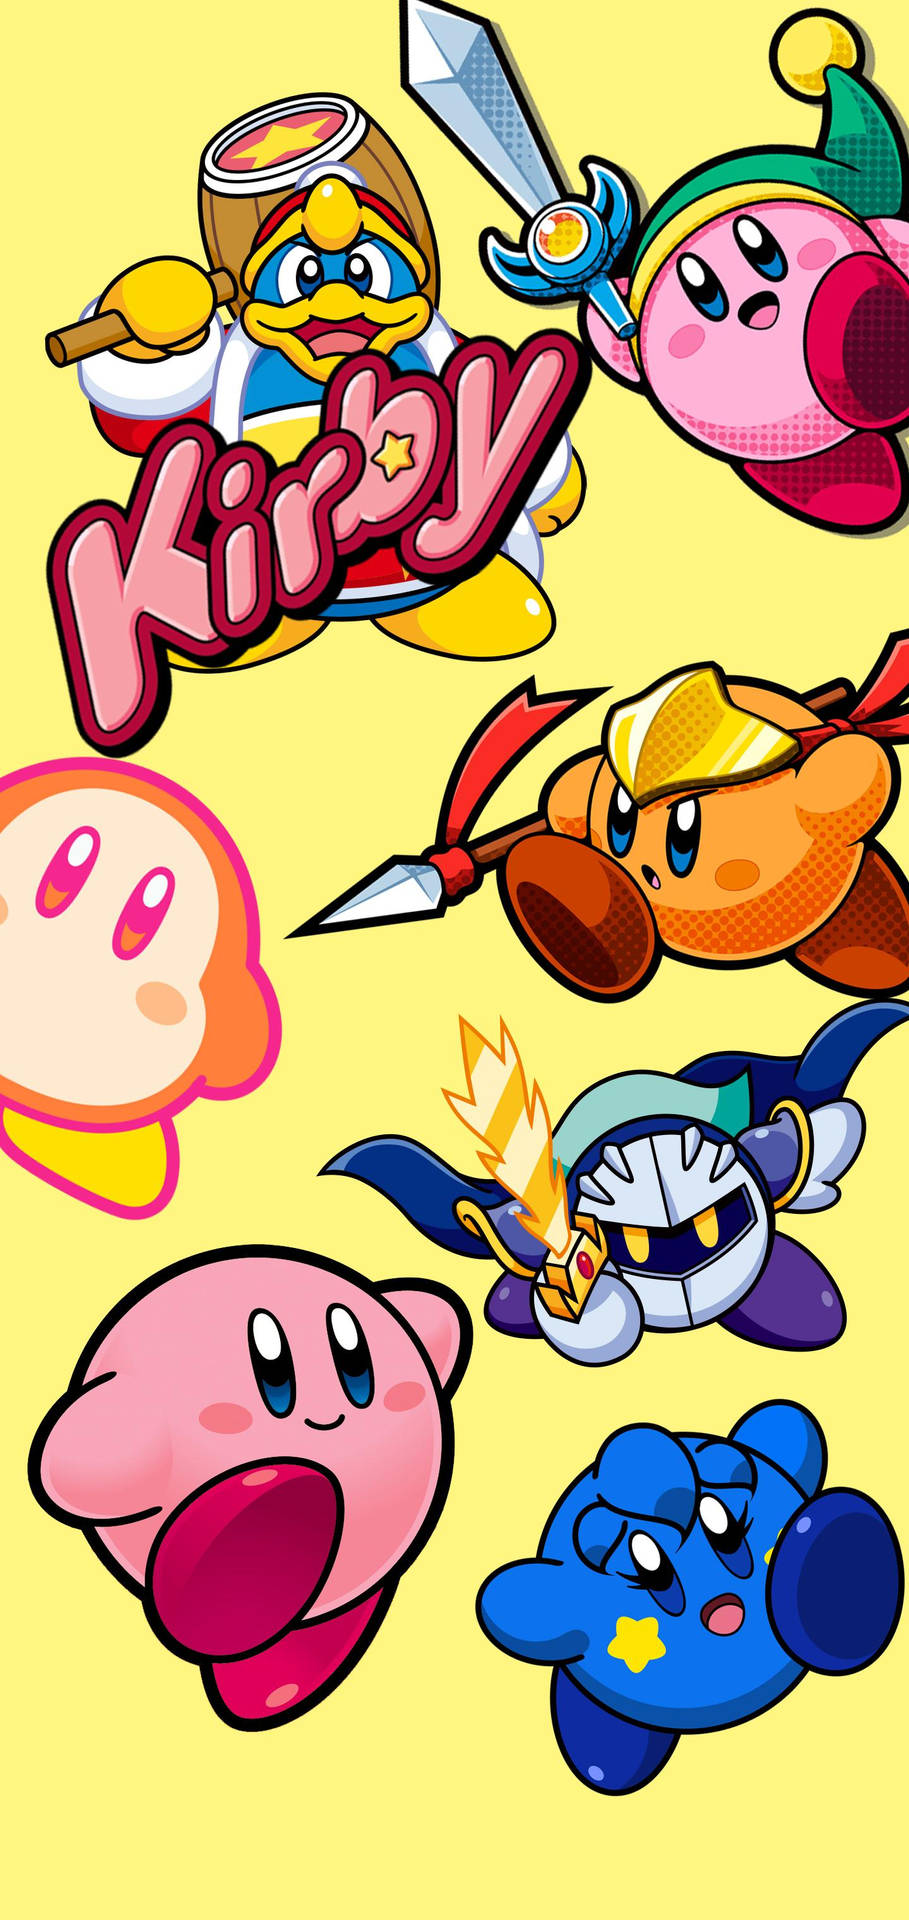 Cool HD wallpaper of Kirby and other characters